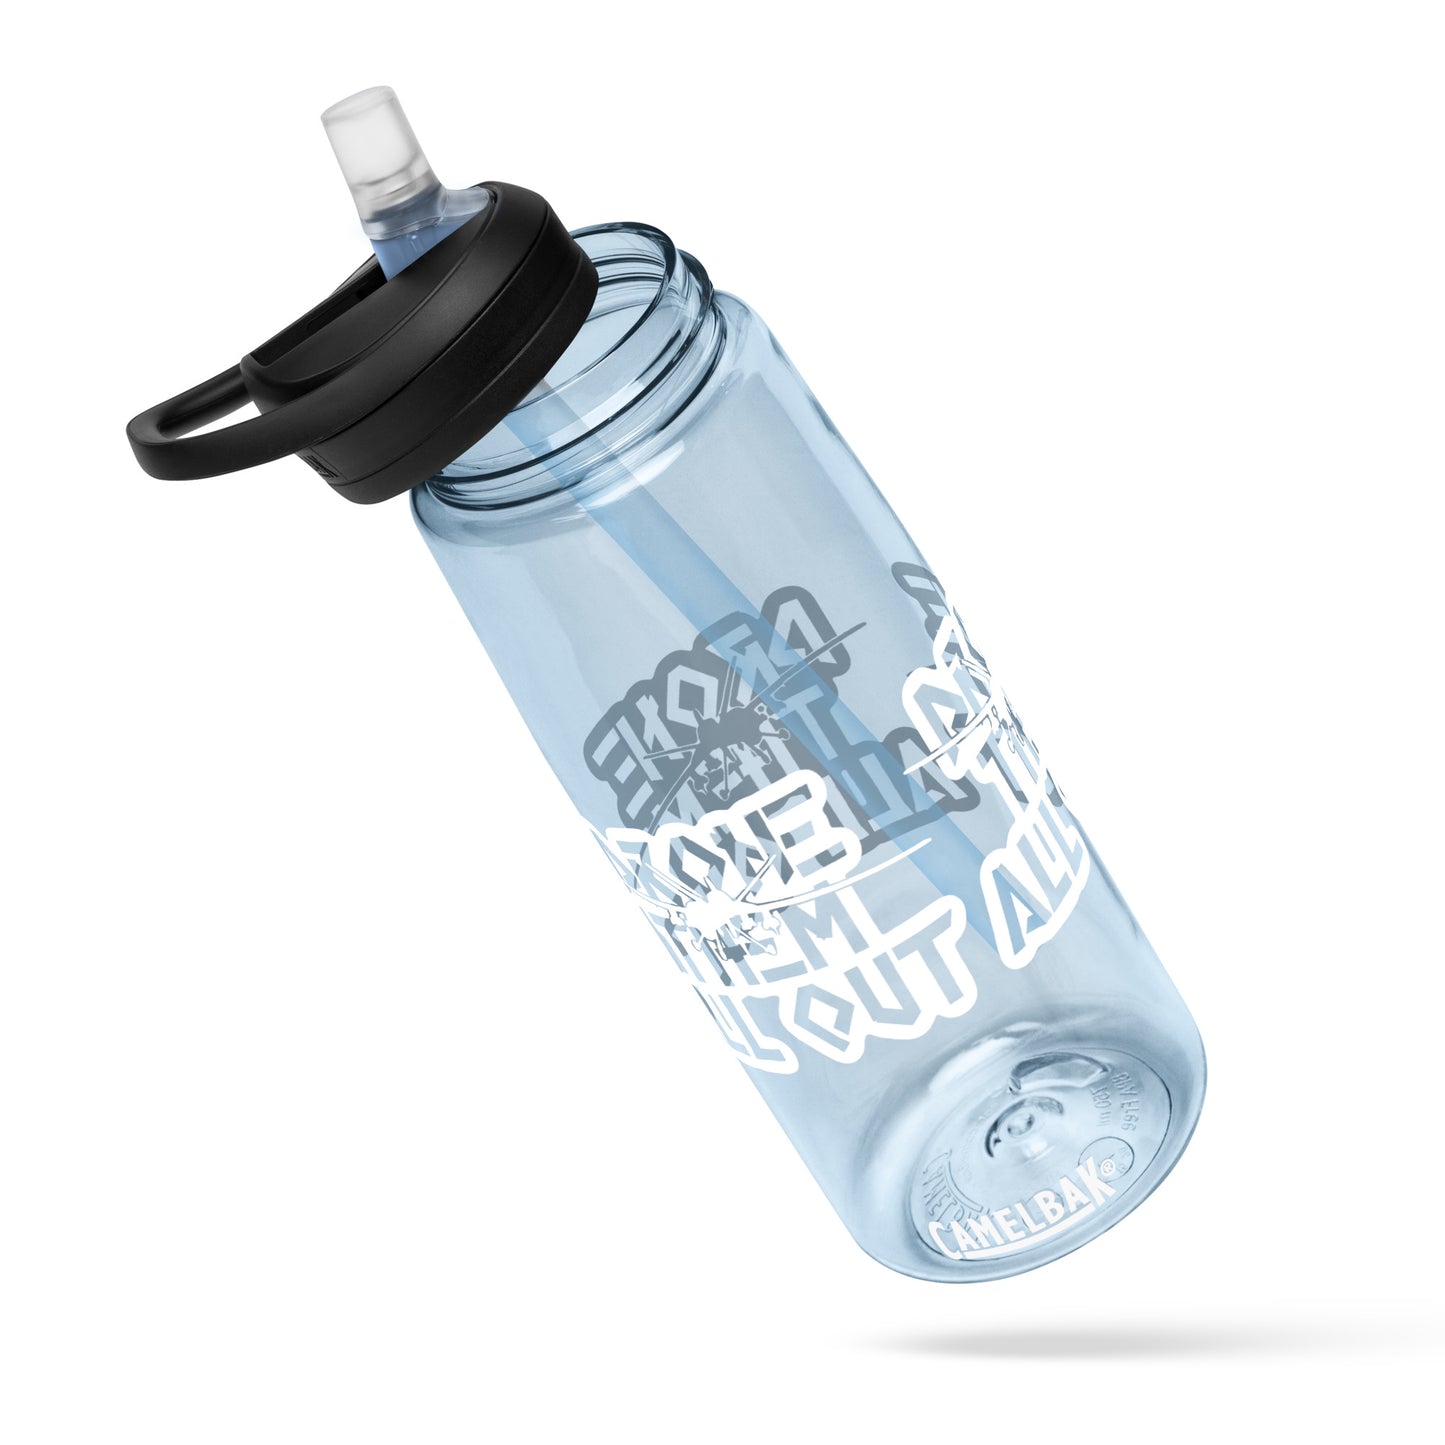 Drone Them Out-Reaper Sports water bottle